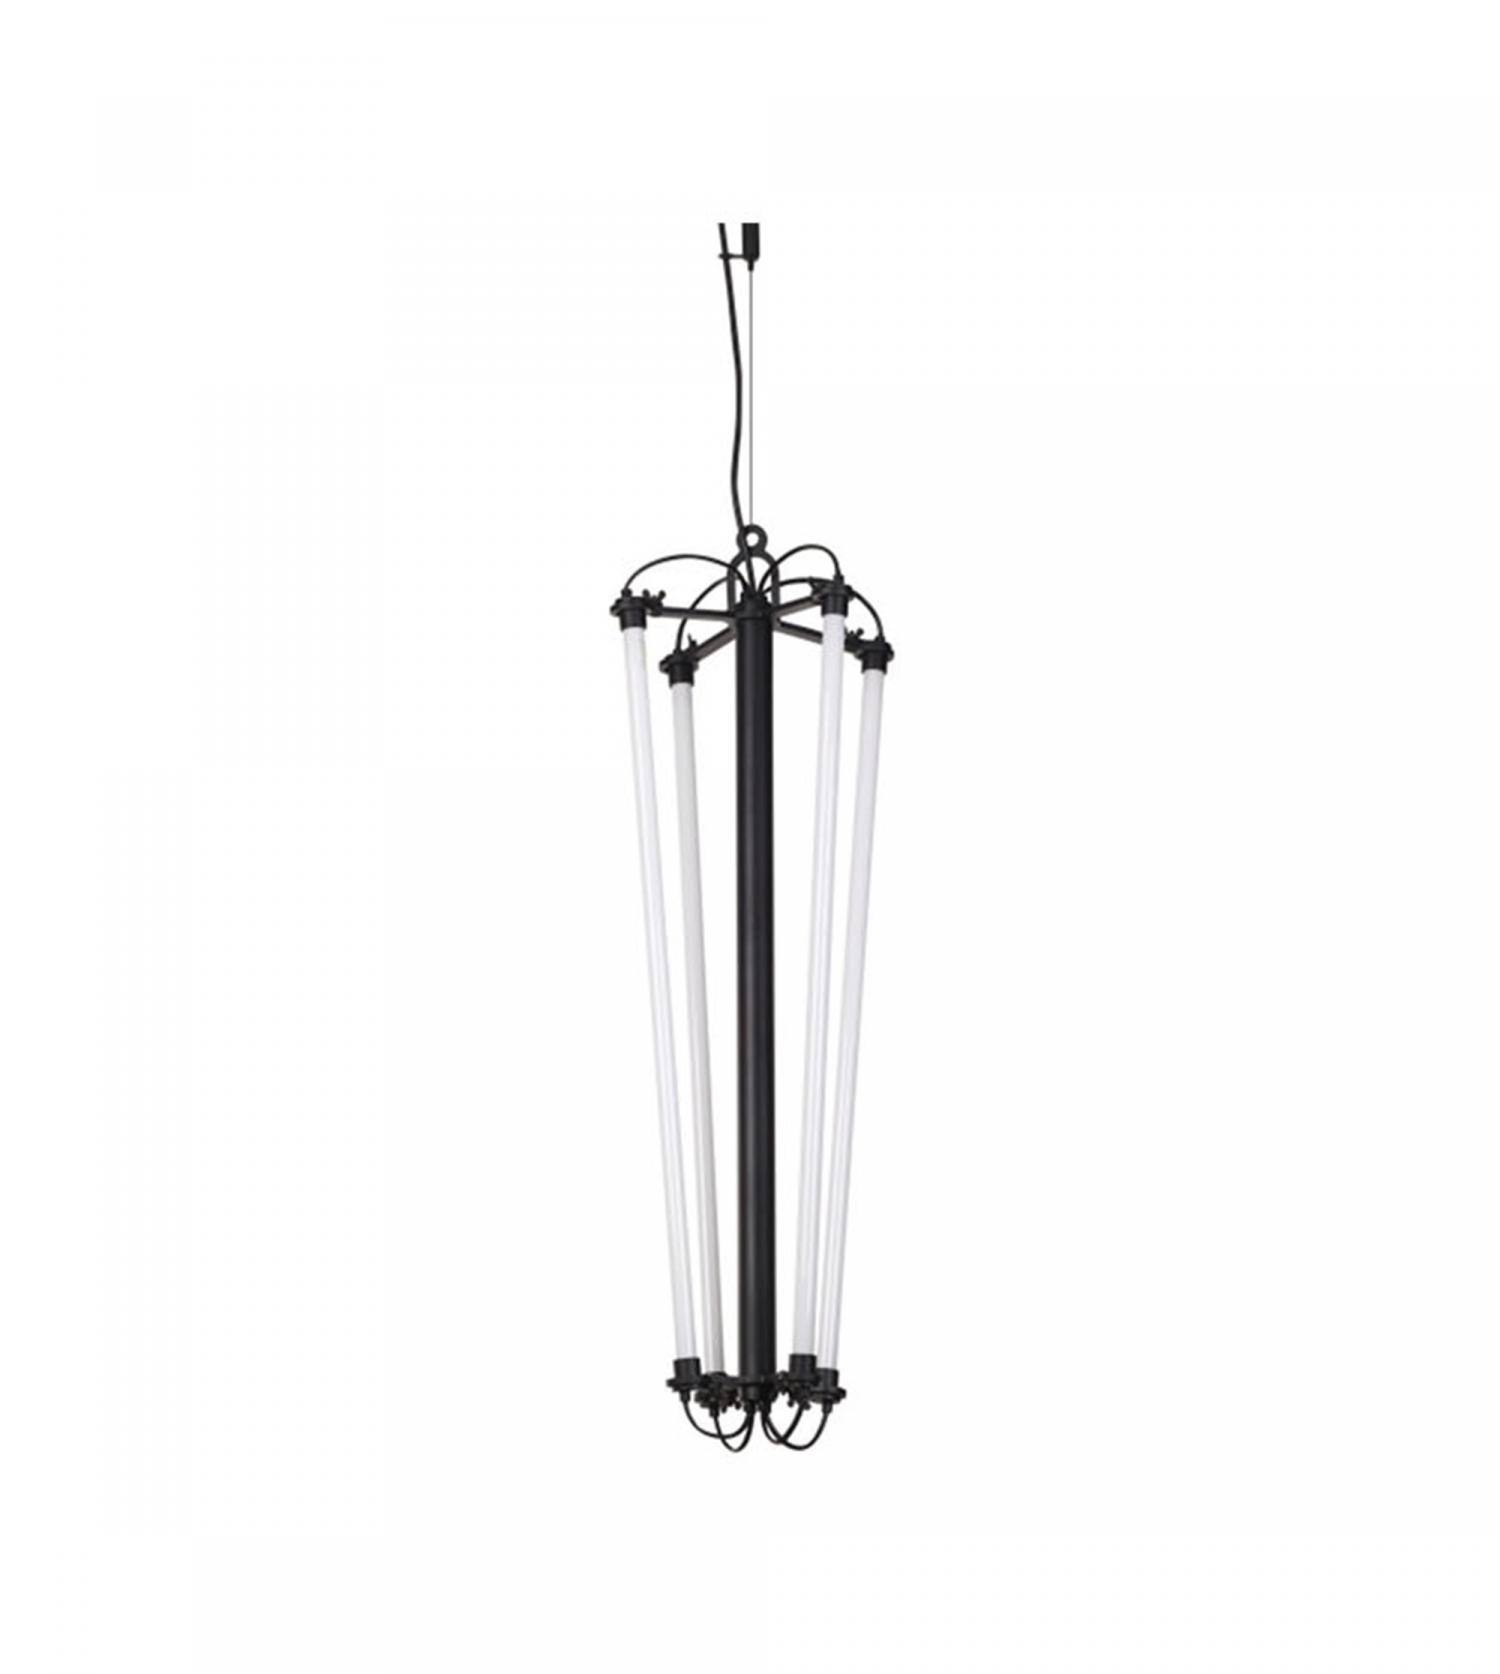 Suspension Mr Tubes dimmable tapered - vertical conique